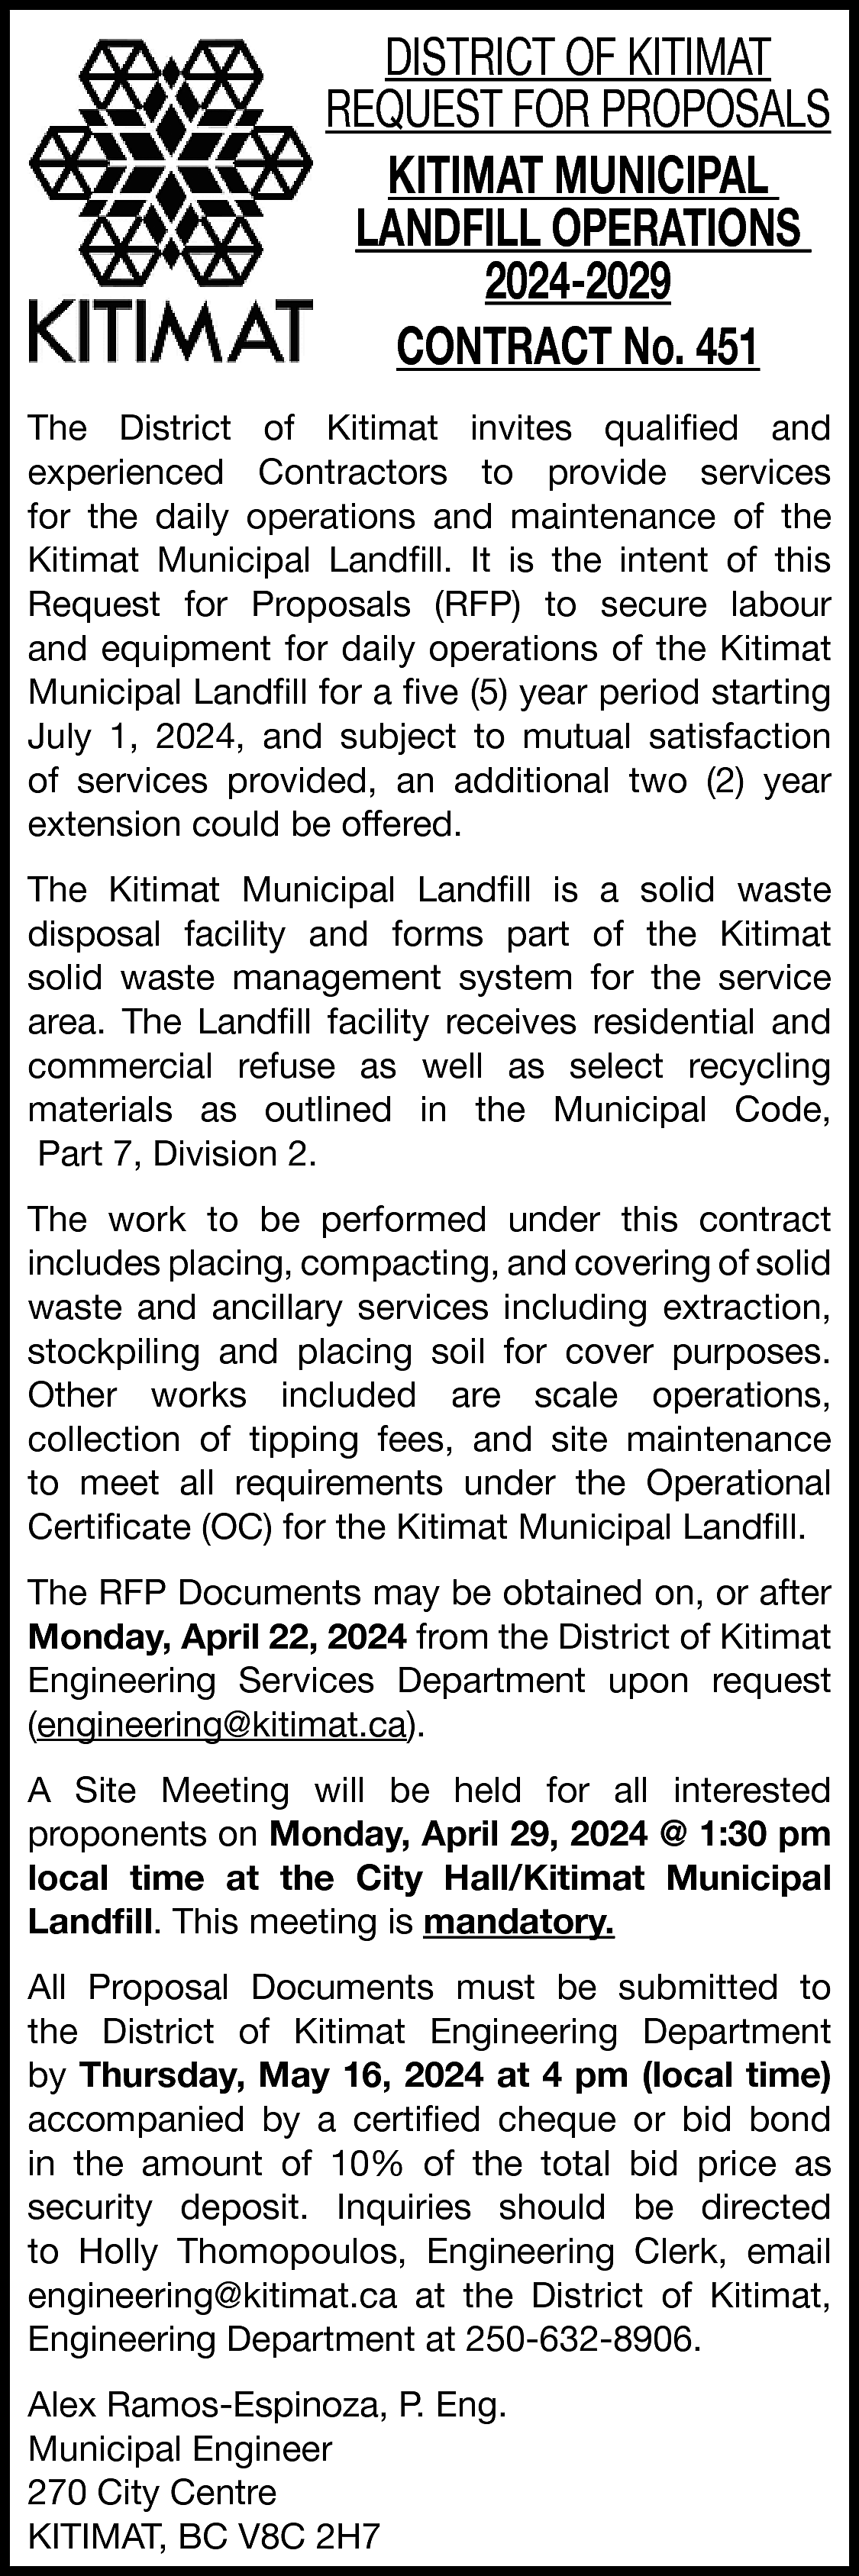 DISTRICT OF KITIMAT <br>REQUEST FOR  DISTRICT OF KITIMAT  REQUEST FOR PROPOSALS  KITIMAT MUNICIPAL  LANDFILL OPERATIONS  2024-2029  CONTRACT No. 451  The District of Kitimat invites qualified and  experienced Contractors to provide services  for the daily operations and maintenance of the  Kitimat Municipal Landfill. It is the intent of this  Request for Proposals (RFP) to secure labour  and equipment for daily operations of the Kitimat  Municipal Landfill for a five (5) year period starting  July 1, 2024, and subject to mutual satisfaction  of services provided, an additional two (2) year  extension could be offered.  The Kitimat Municipal Landfill is a solid waste  disposal facility and forms part of the Kitimat  solid waste management system for the service  area. The Landfill facility receives residential and  commercial refuse as well as select recycling  materials as outlined in the Municipal Code,  Part 7, Division 2.  The work to be performed under this contract  includes placing, compacting, and covering of solid  waste and ancillary services including extraction,  stockpiling and placing soil for cover purposes.  Other works included are scale operations,  collection of tipping fees, and site maintenance  to meet all requirements under the Operational  Certificate (OC) for the Kitimat Municipal Landfill.  The RFP Documents may be obtained on, or after  Monday, April 22, 2024 from the District of Kitimat  Engineering Services Department upon request  (engineering@kitimat.ca).  A Site Meeting will be held for all interested  proponents on Monday, April 29, 2024 @ 1:30 pm  local time at the City Hall/Kitimat Municipal  Landfill. This meeting is mandatory.  All Proposal Documents must be submitted to  the District of Kitimat Engineering Department  by Thursday, May 16, 2024 at 4 pm (local time)  accompanied by a certified cheque or bid bond  in the amount of 10% of the total bid price as  security deposit. Inquiries should be directed  to Holly Thomopoulos, Engineering Clerk, email  engineering@kitimat.ca at the District of Kitimat,  Engineering Department at 250-632-8906.  Alex Ramos-Espinoza, P. Eng.  Municipal Engineer  270 City Centre  KITIMAT, BC V8C 2H7    